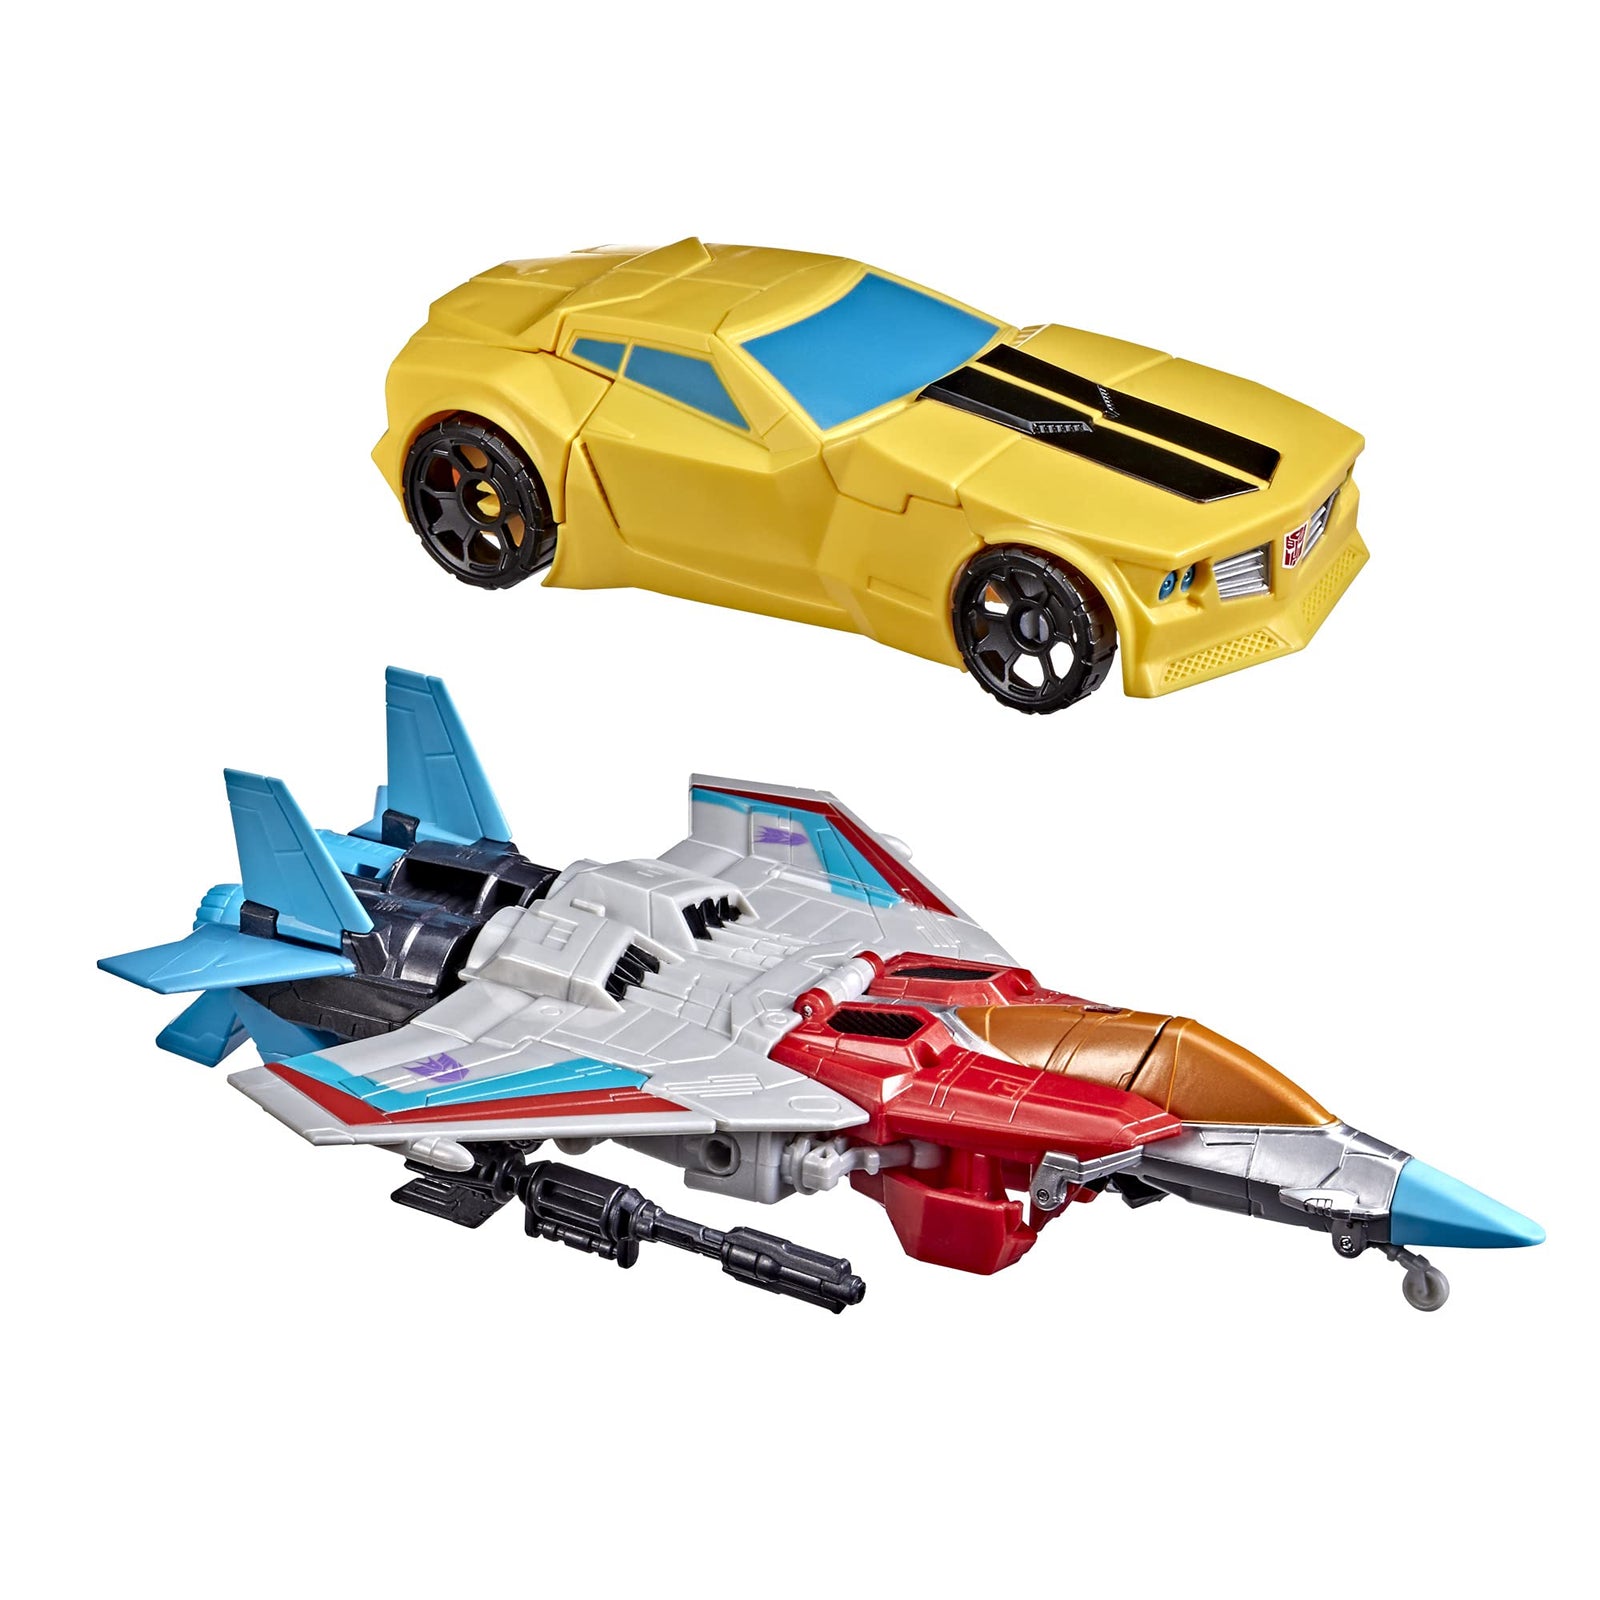 Transformers Toys Heroes and Villains Bumblebee and Starscream 2-Pack Action Figures - for Kids Ages 6 and Up, 7-inch